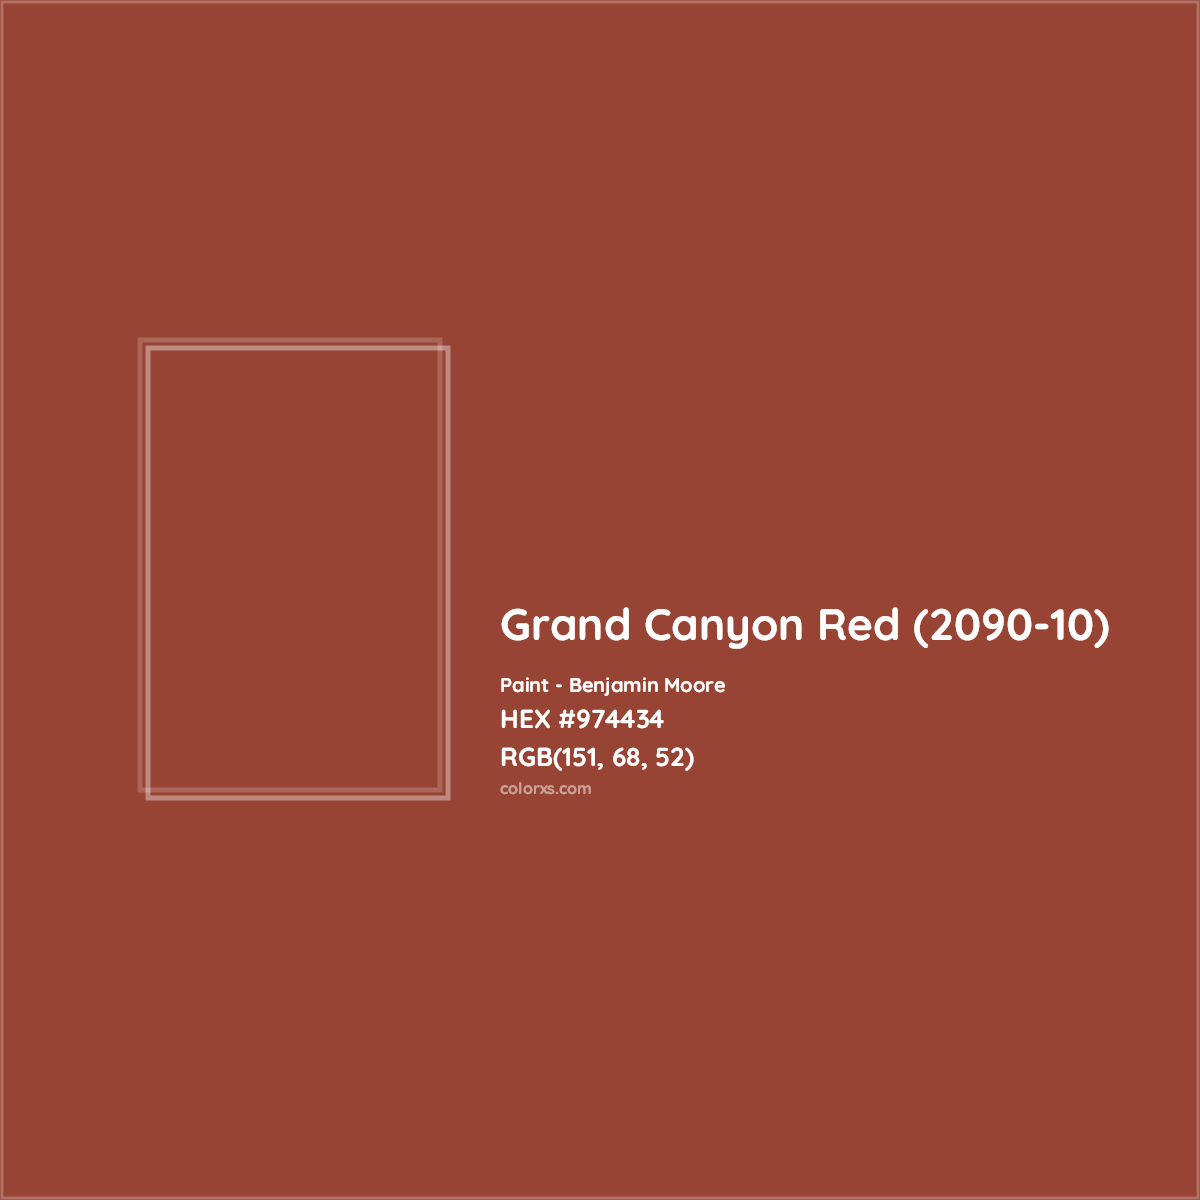 HEX #974434 Grand Canyon Red (2090-10) Paint Benjamin Moore - Color Code